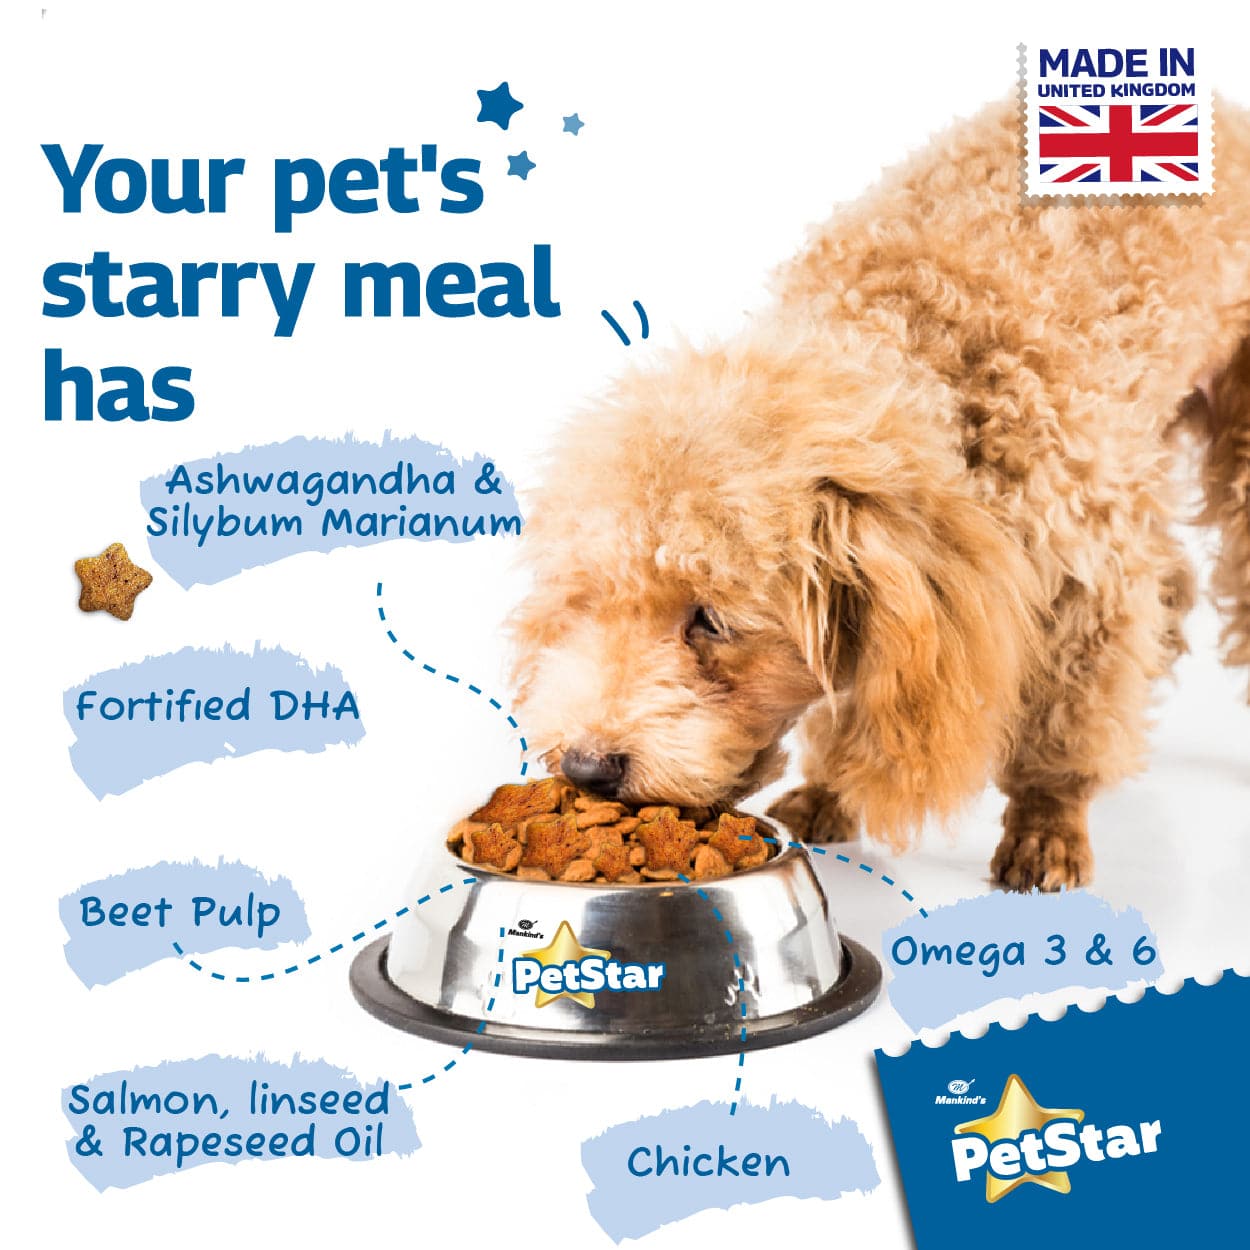 Mankind Petstar Milk and Wheat Dry Food (BOGO) and SmartHeart Chicken Chunks in Gravy Wet Food for Puppies Combo